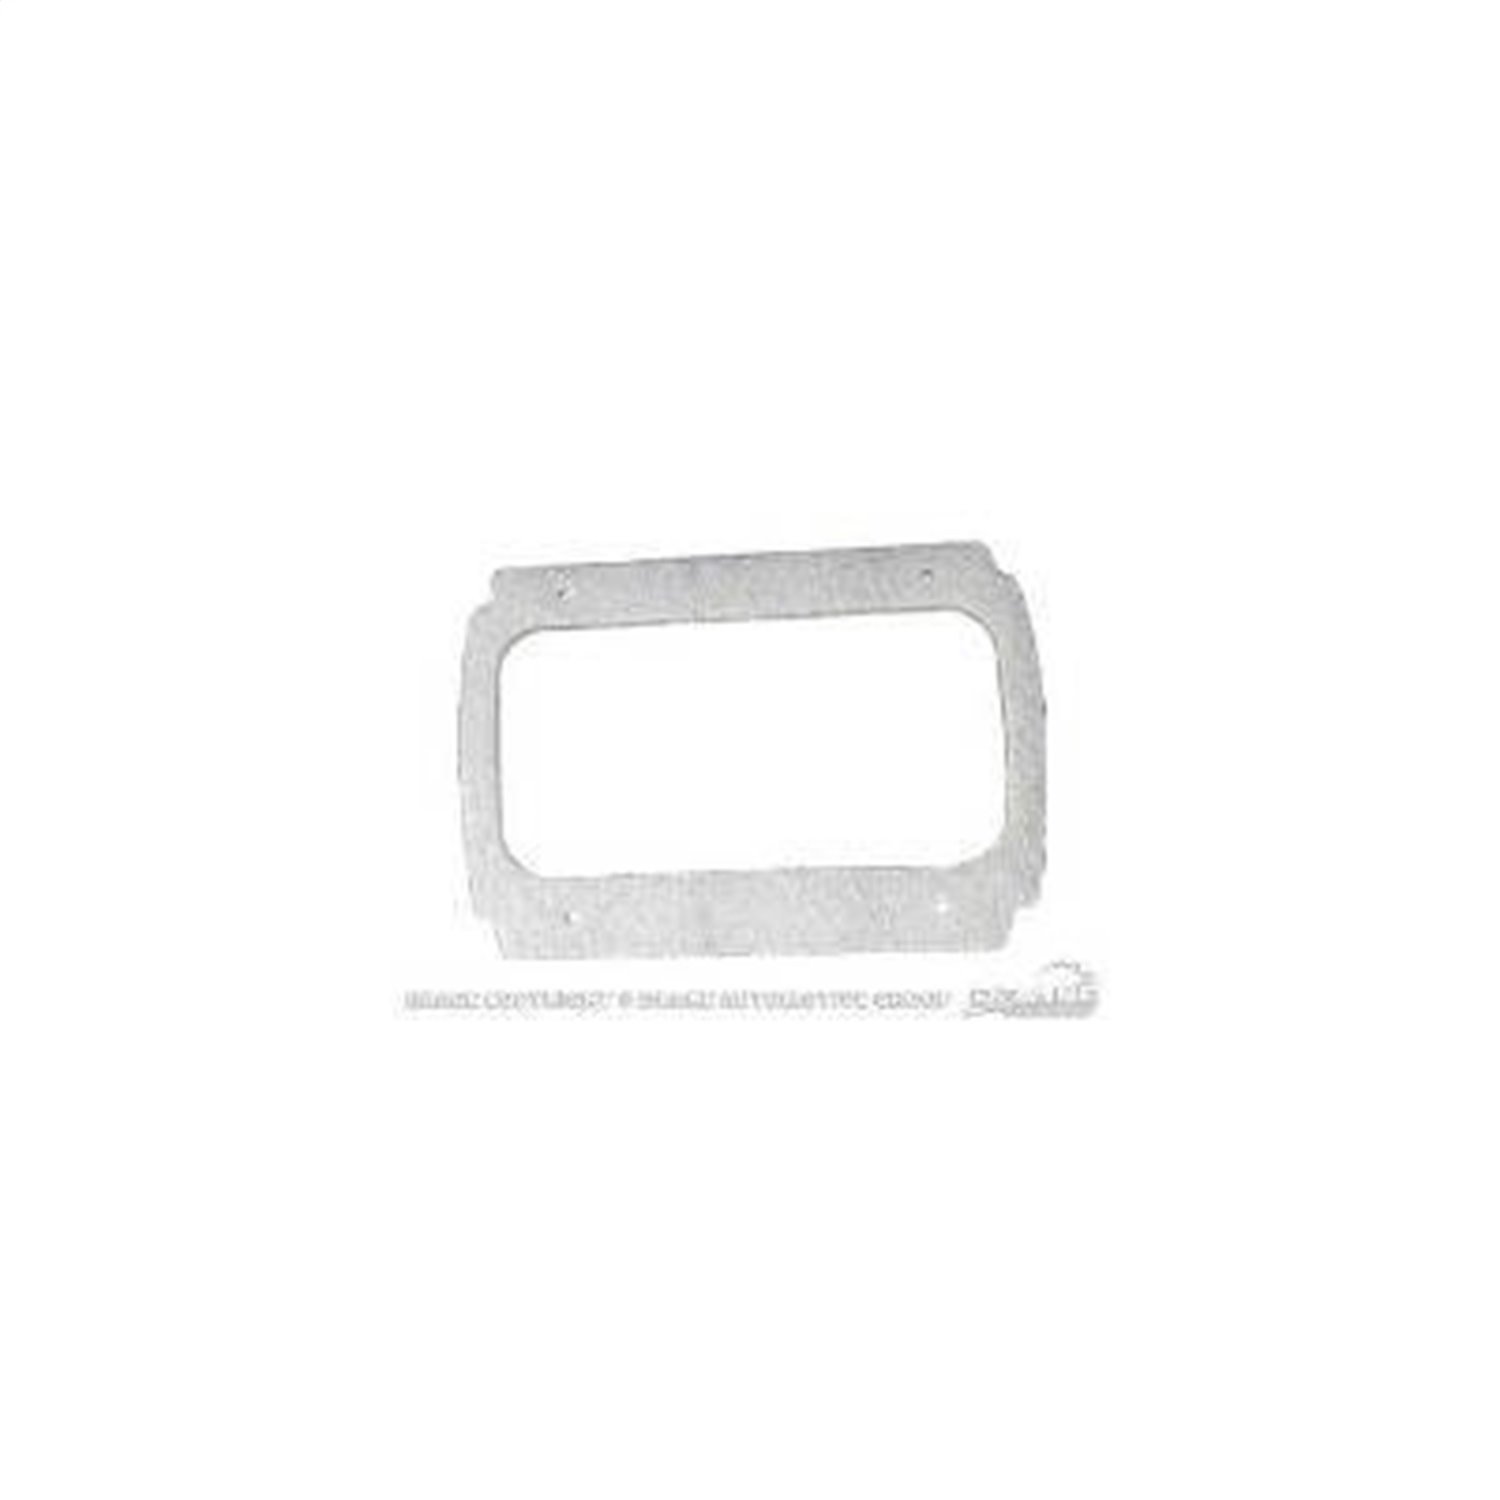 Tail Light Housing Gasket 1964-1966 Ford Mustang